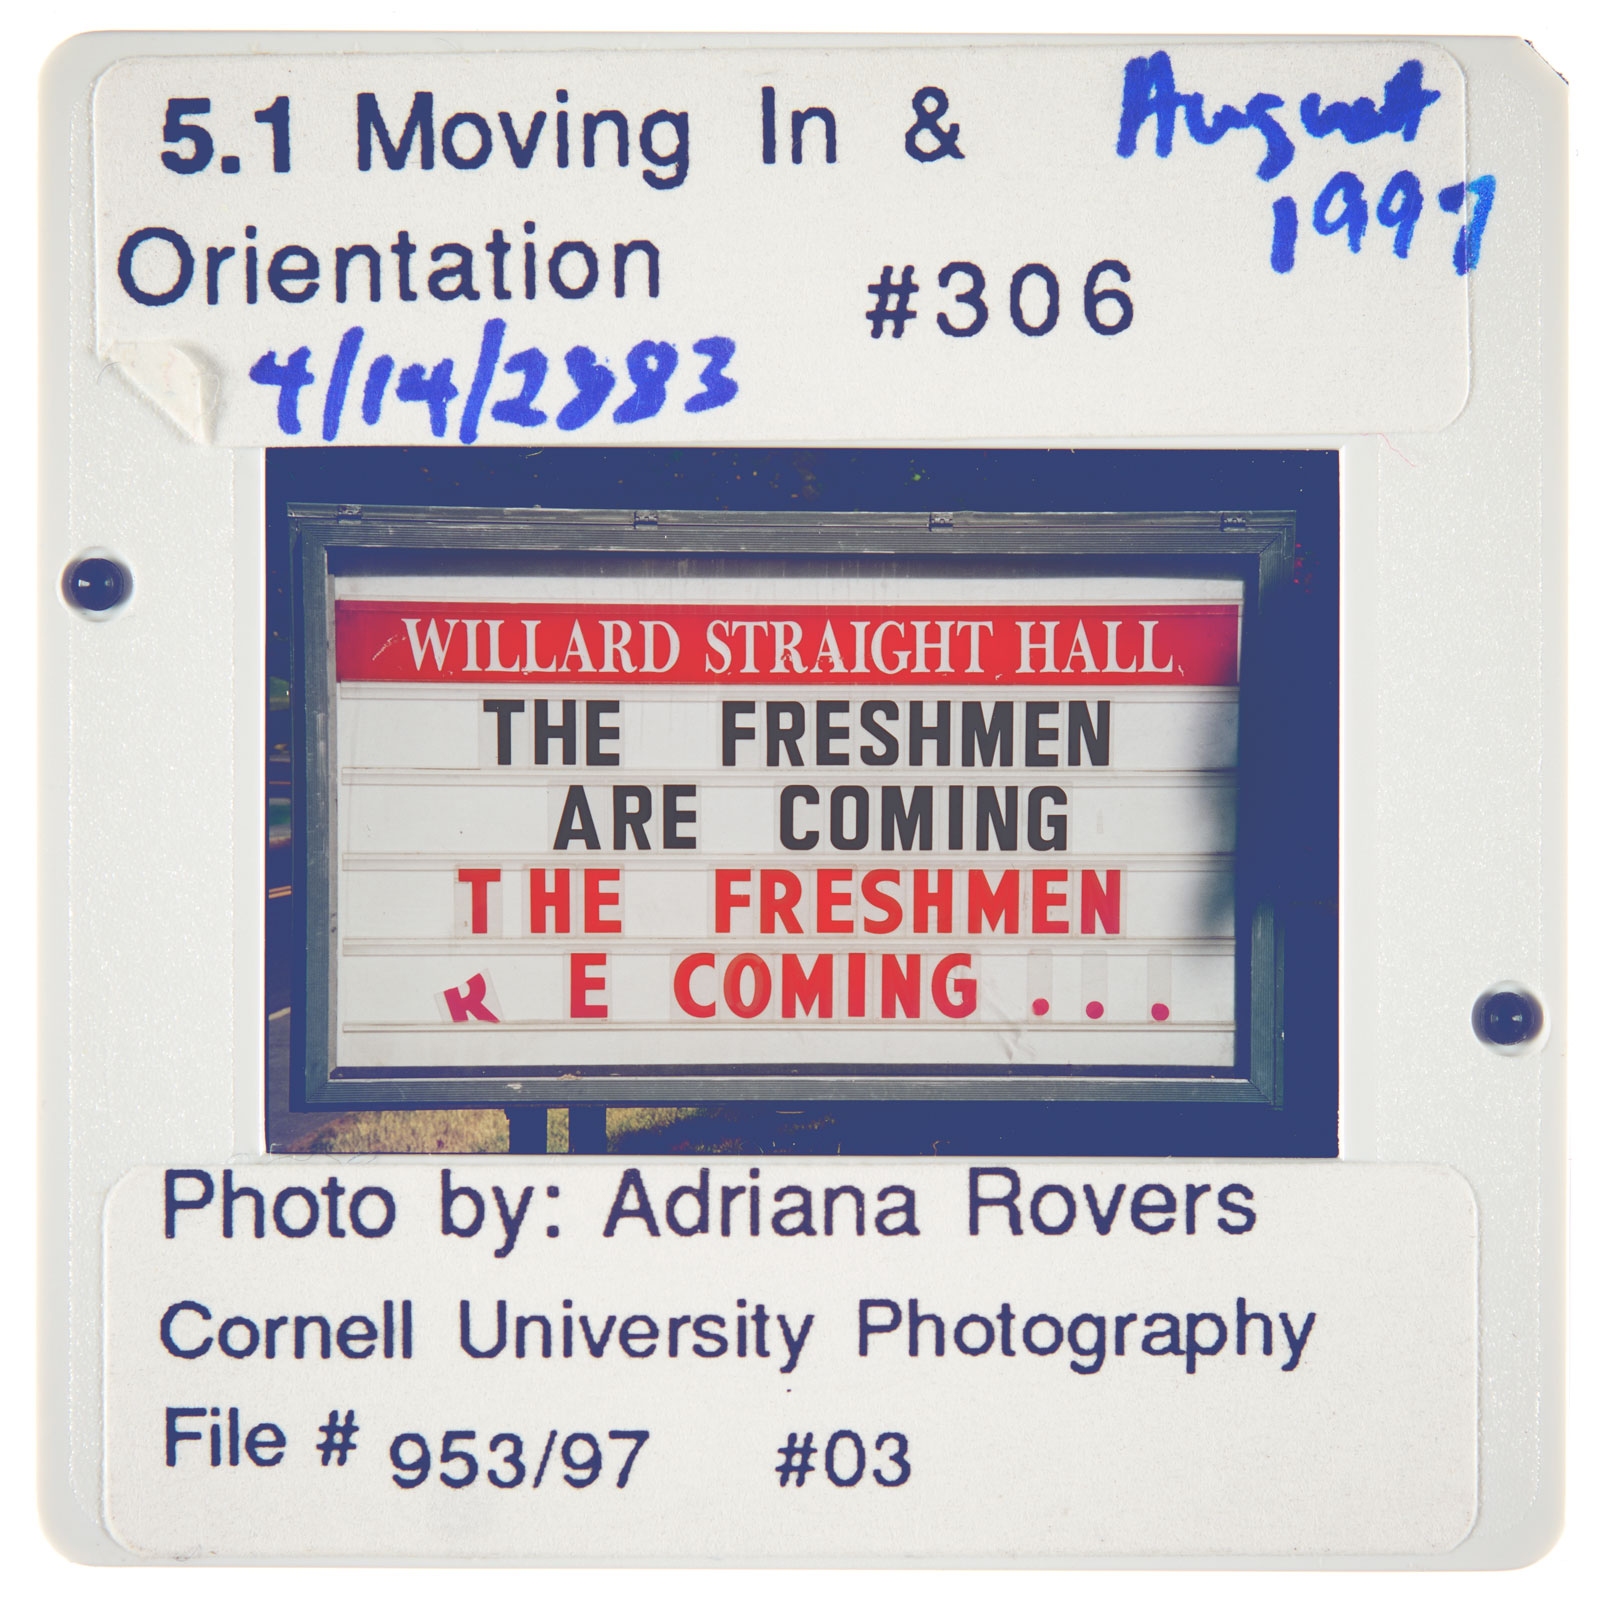 A University Photography slide shows the Willard Straight Hall sign welcoming first-year students in 1997